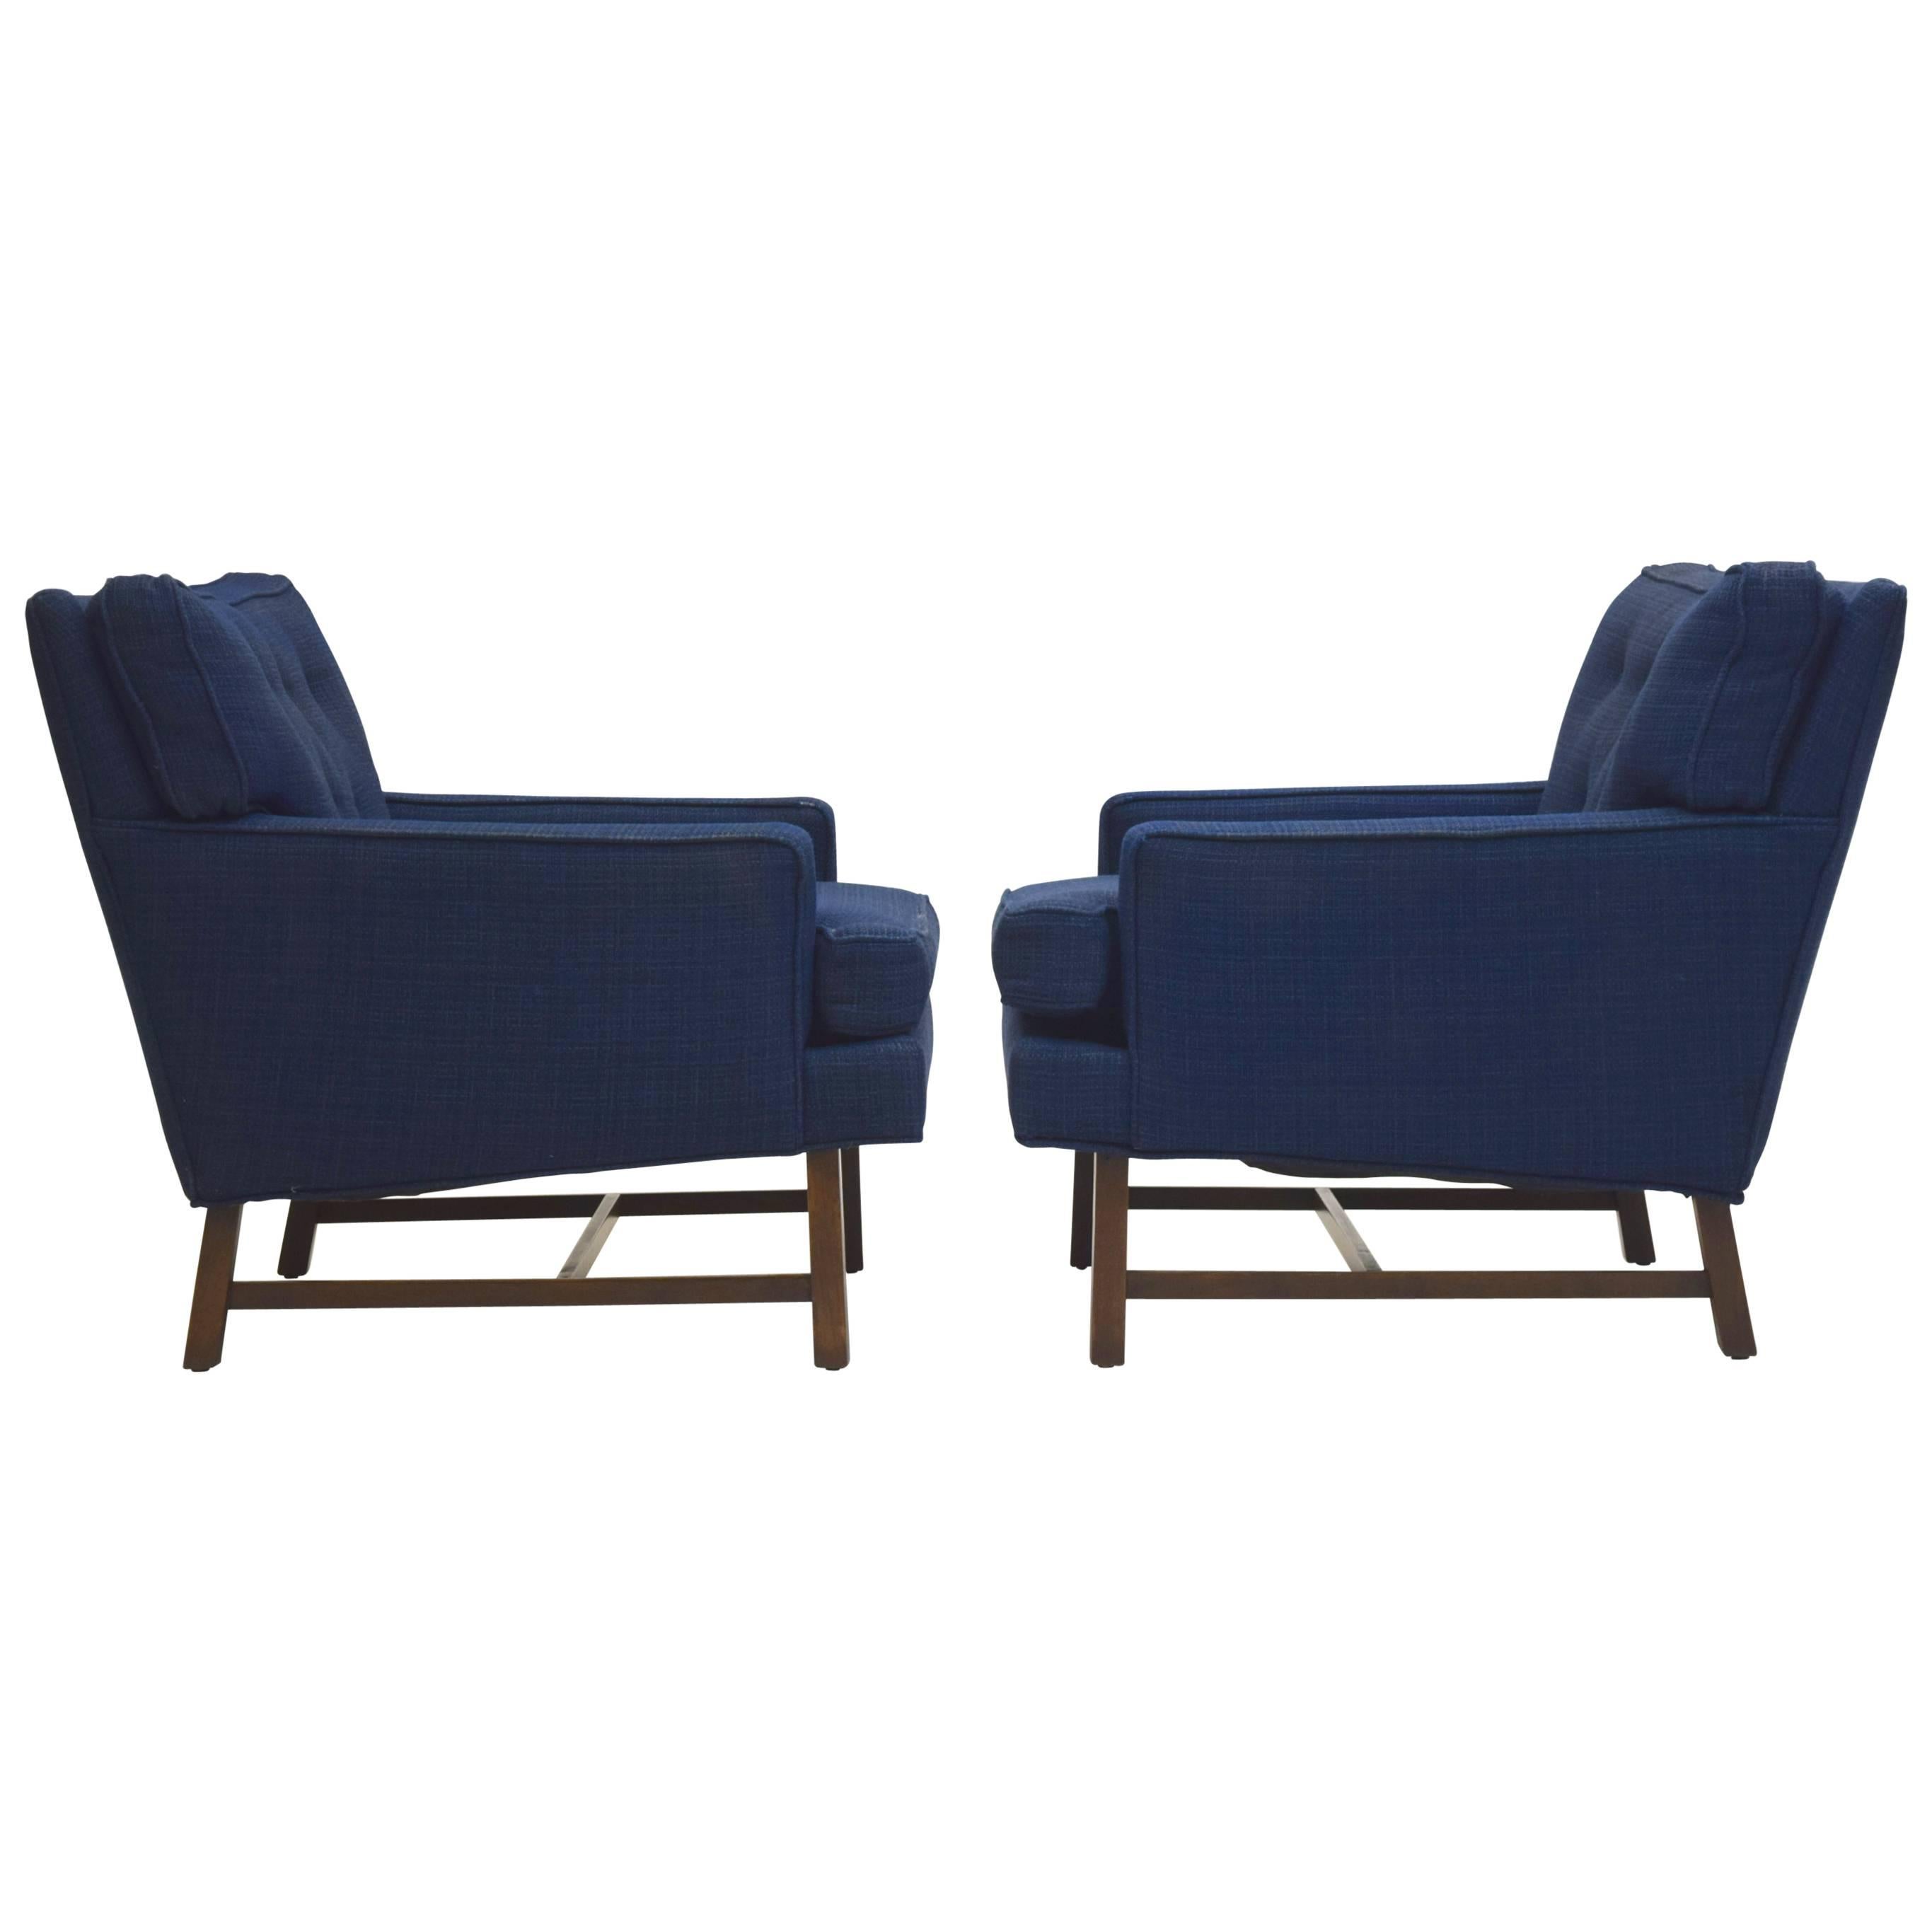 Pair of Easy chairs in the Style of Harvey Probber